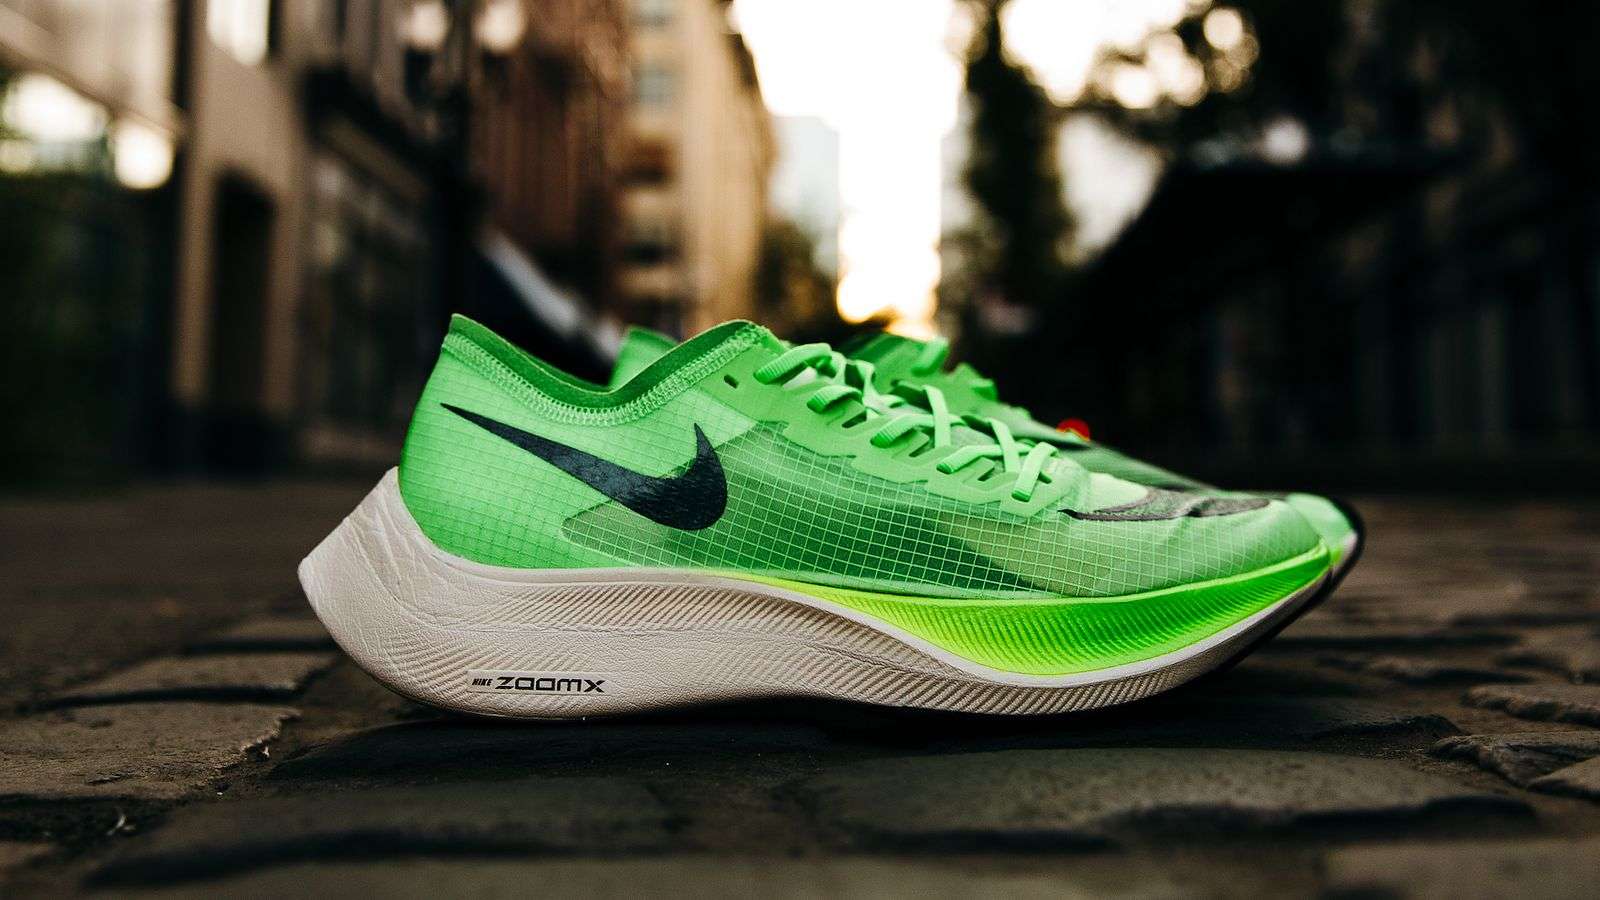 Nike ZoomX Vaporfly. 2 +80 Most Inspiring Workout Shoes Ideas for Women - 14